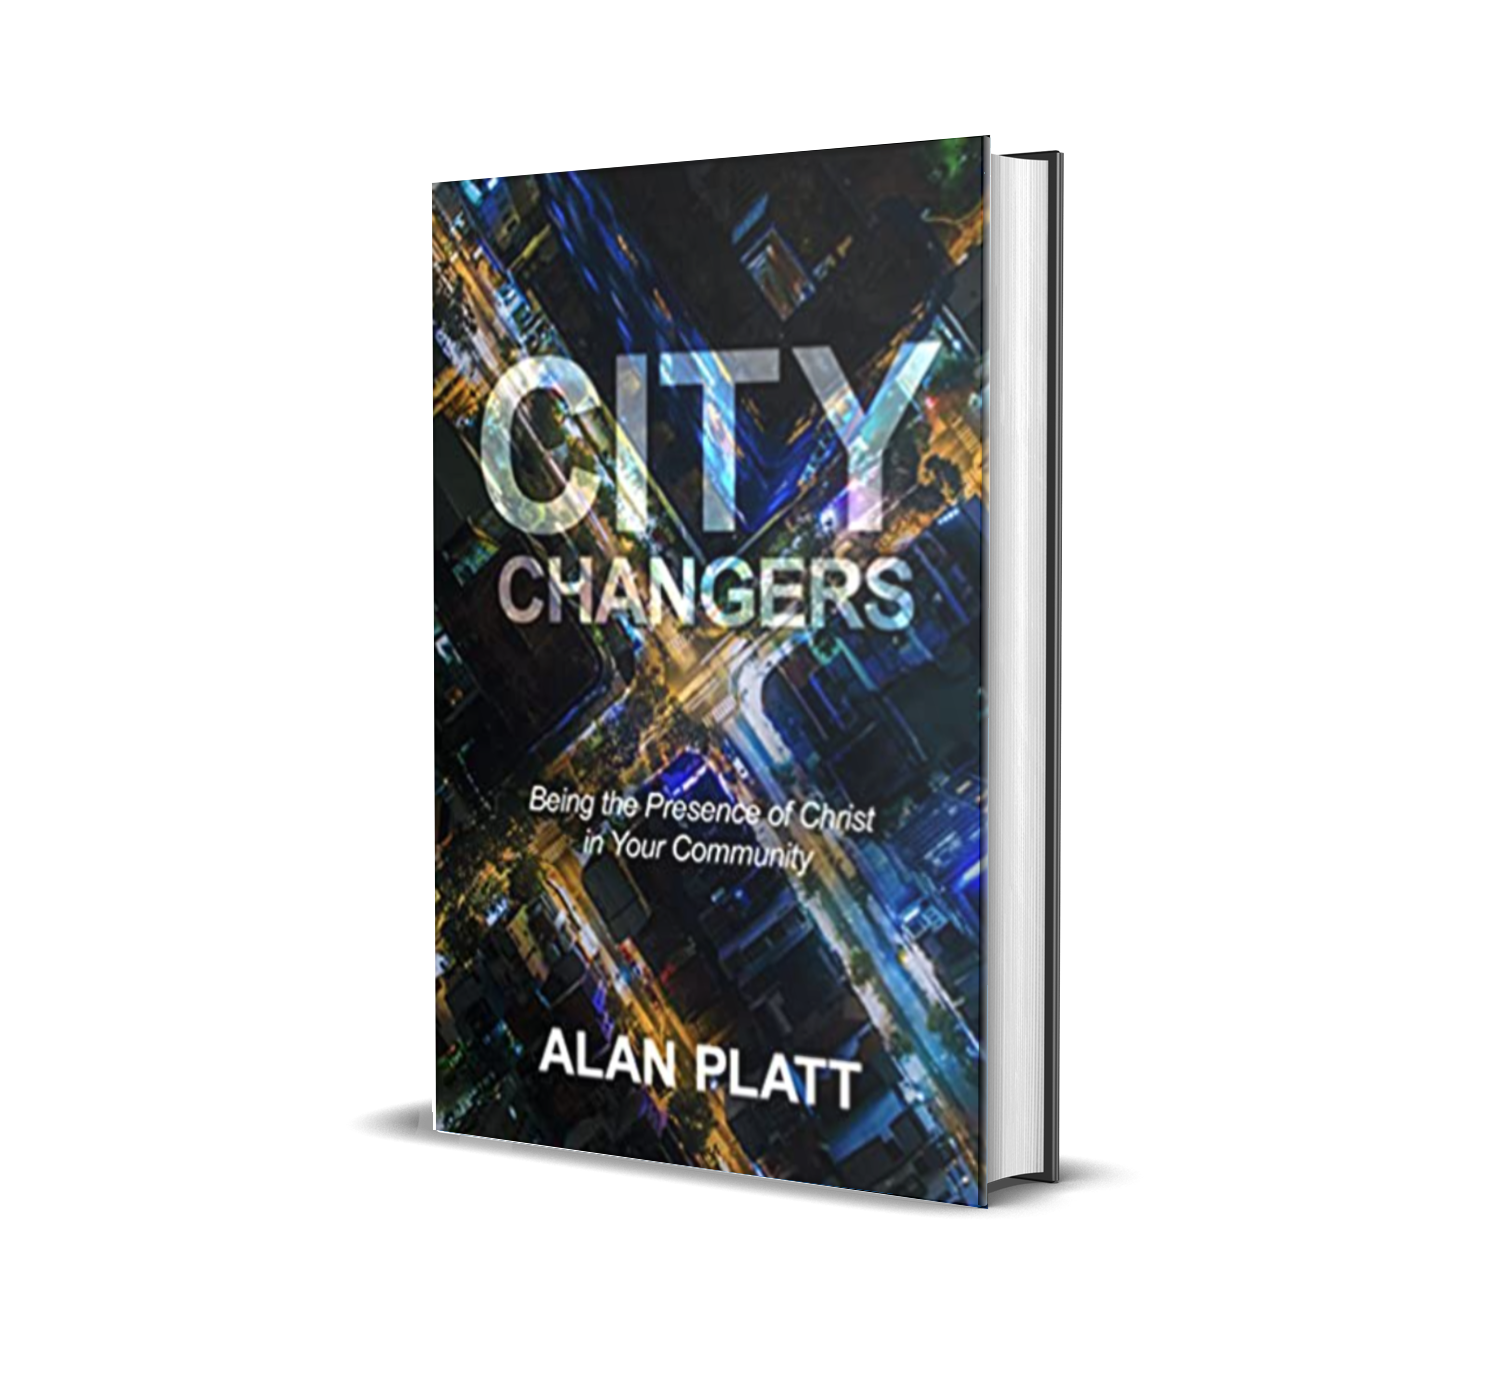 City Changers Book